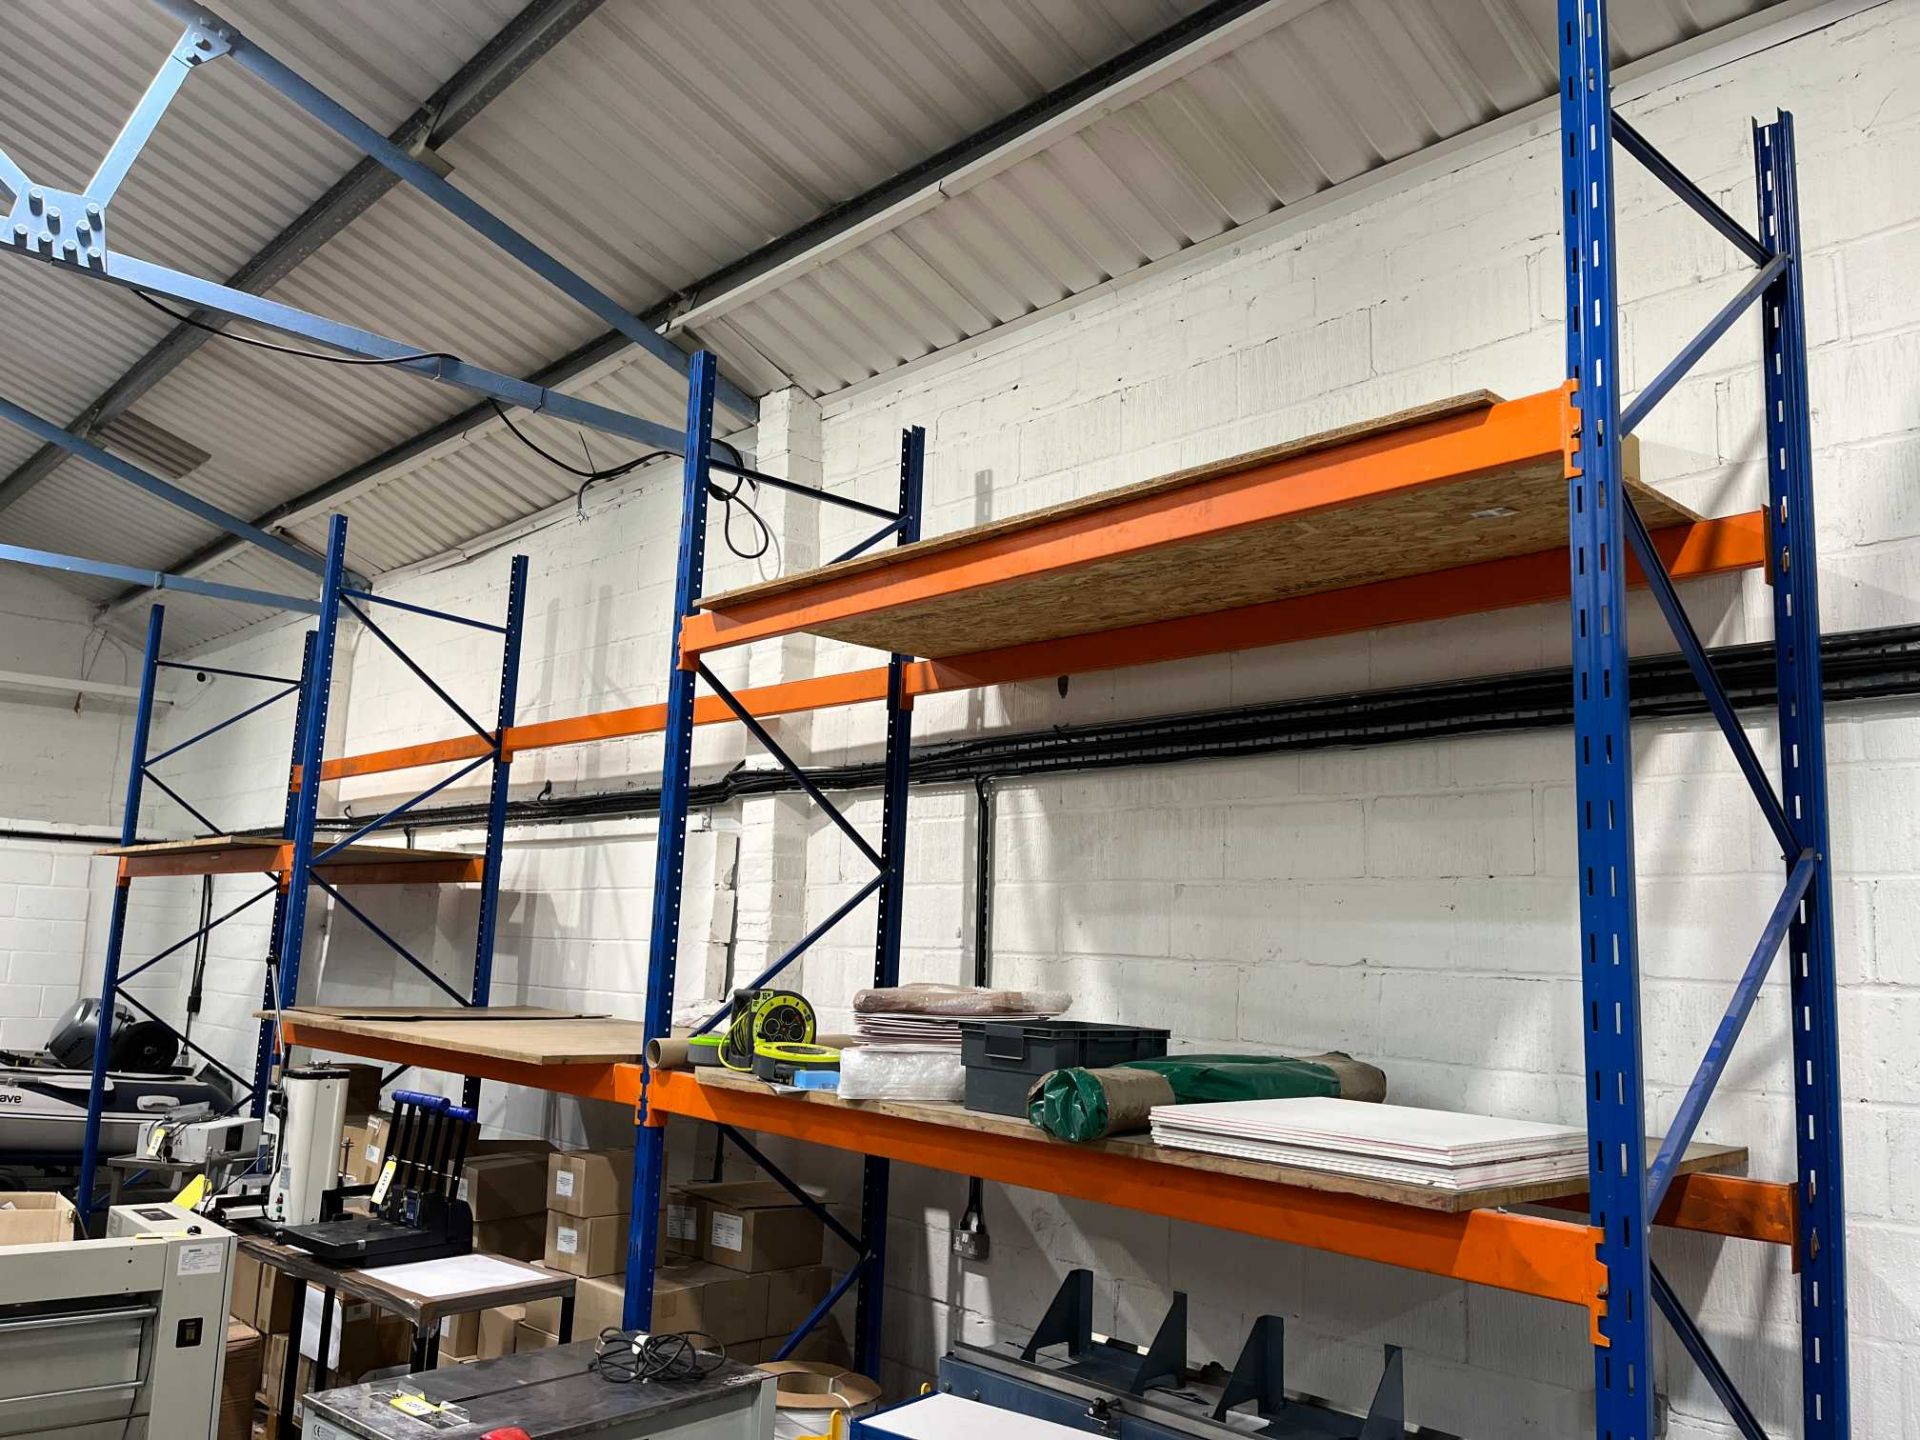 6 x bays pallet racking, various; (275 x 90 x 300 cm x 3 and 275 x 90 x 350 cm x 3) - Please Note: